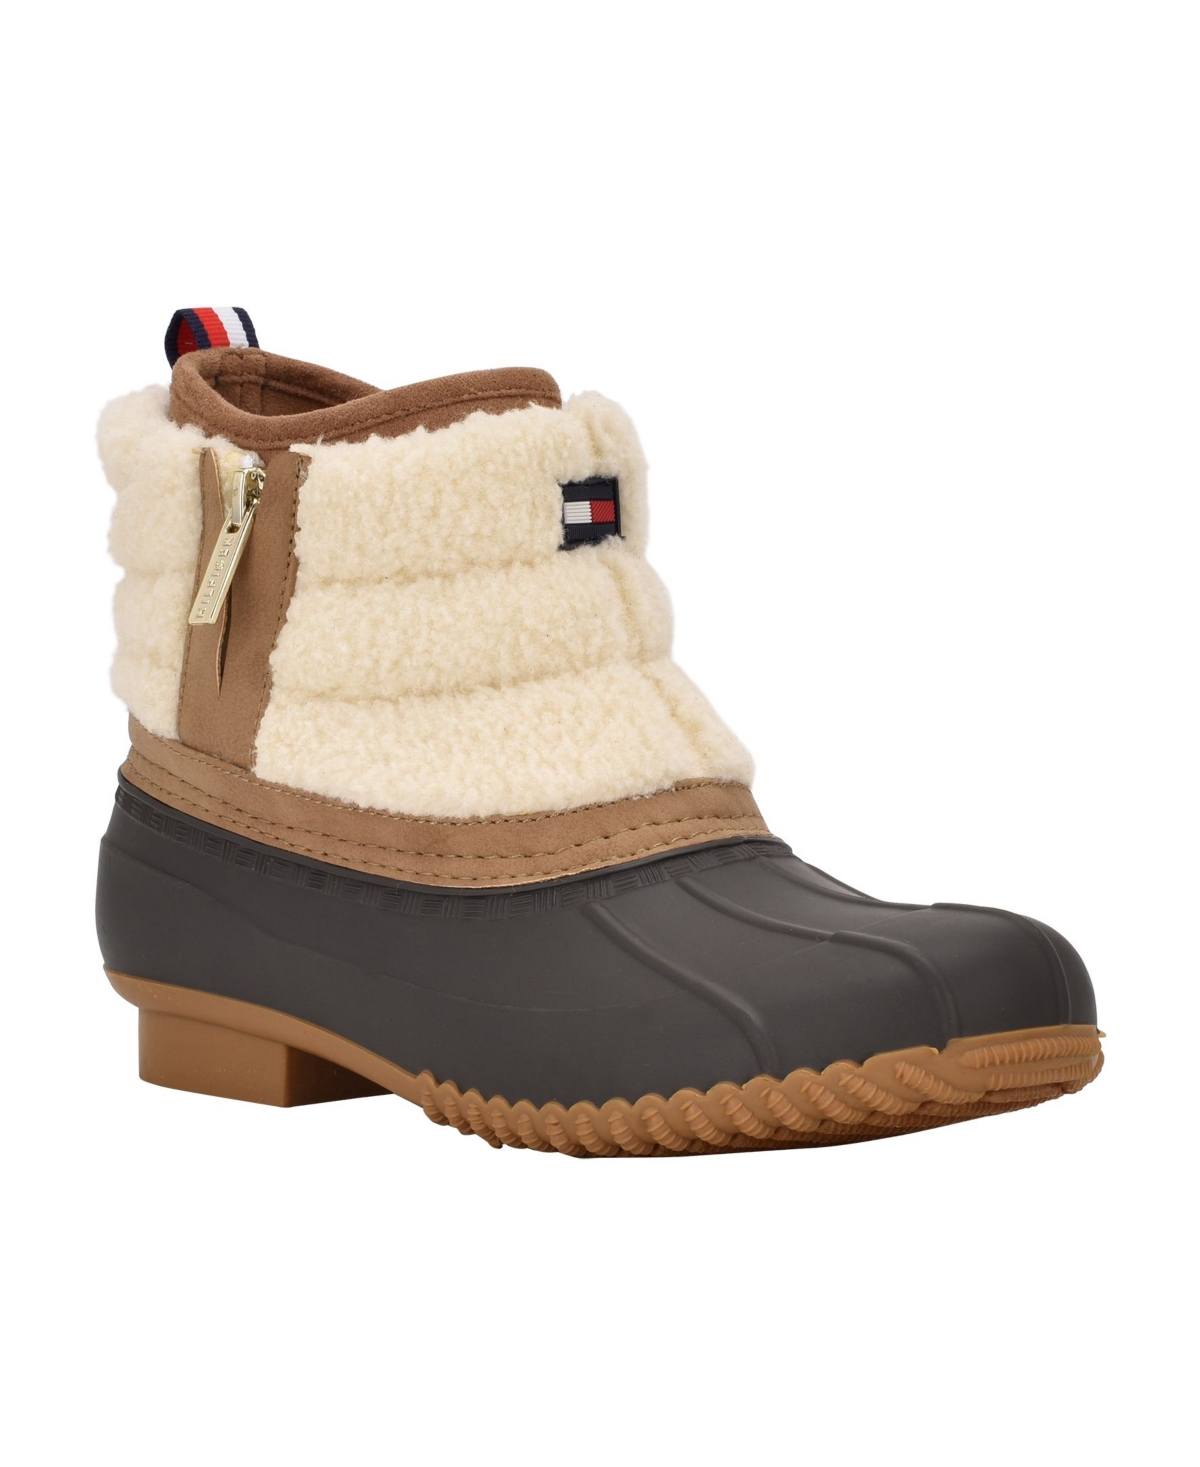 UPC 195972709881 product image for Tommy Hilfiger Women's Roana Zip Up Duck Booties Women's Shoes | upcitemdb.com